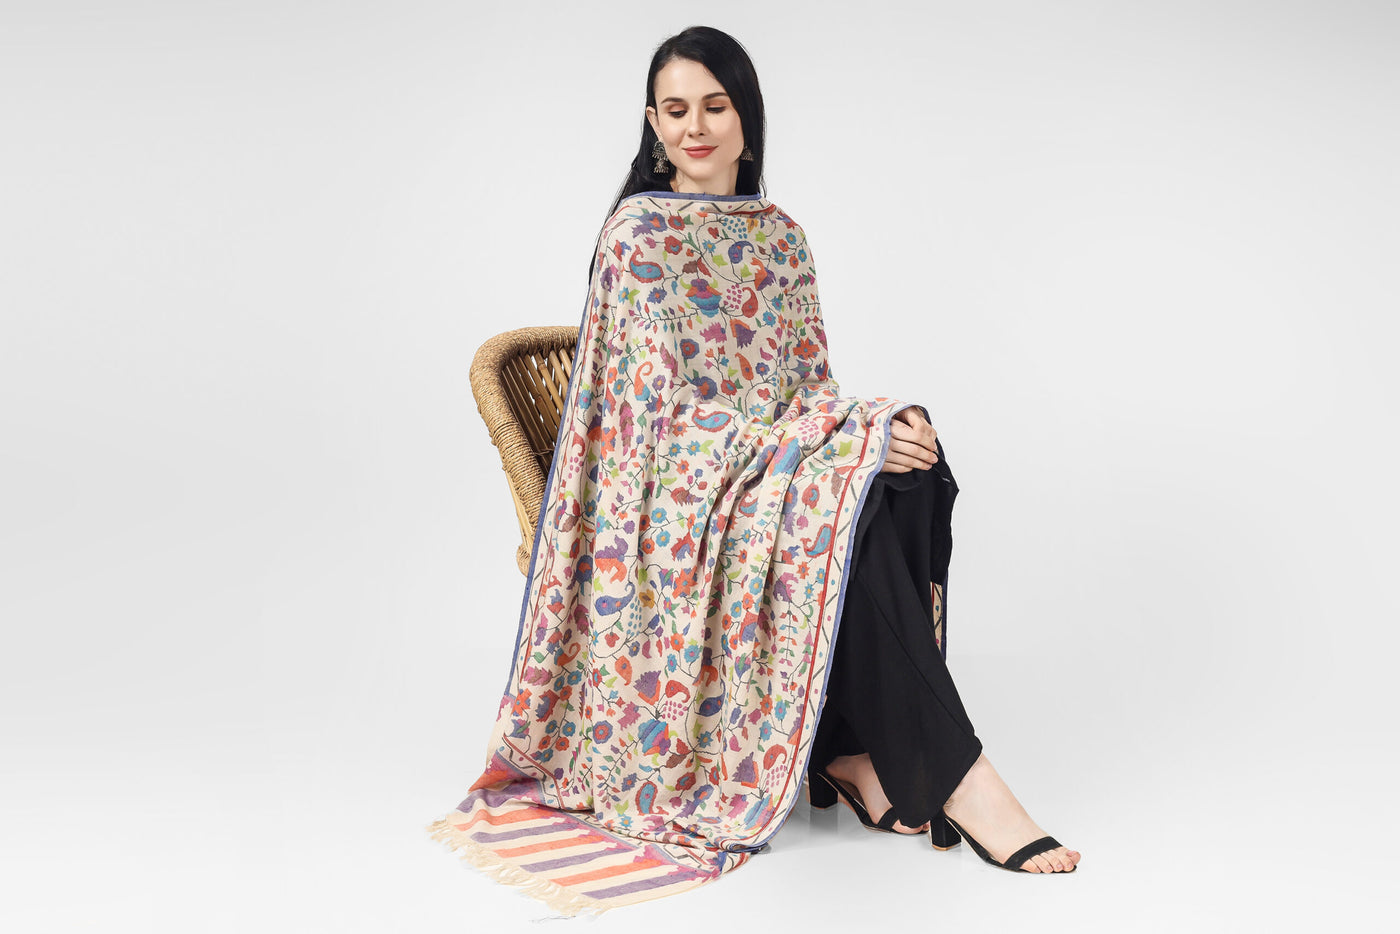  Pashmina white kani shawl,owning such a treasure would certainly be a great addition to any fashion collection, and the fact that it was made by skilled artisans .